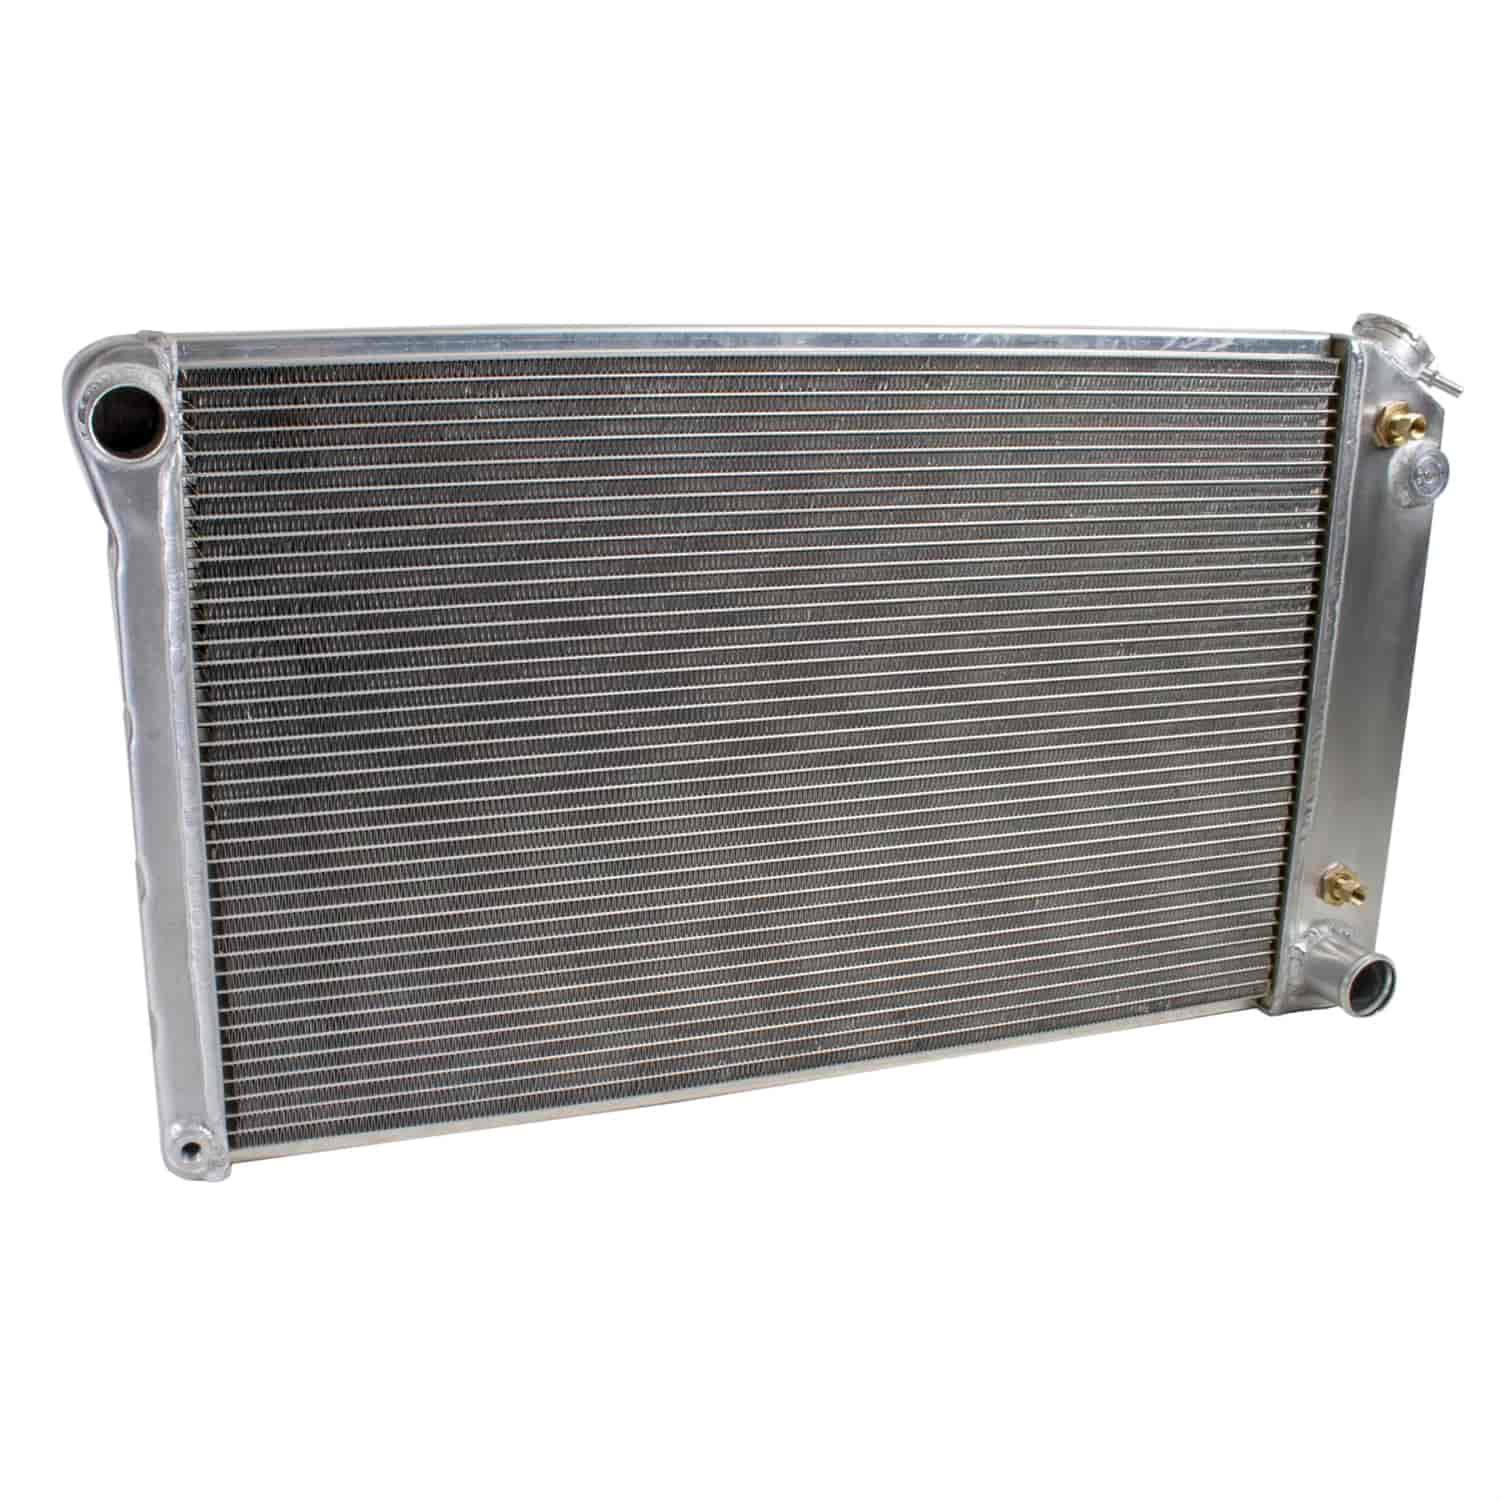 ExactFit Radiator for GM 1968-1977 A Body, 1978-1988 G Body, 1970-1981 F Body with Transmission Cooler